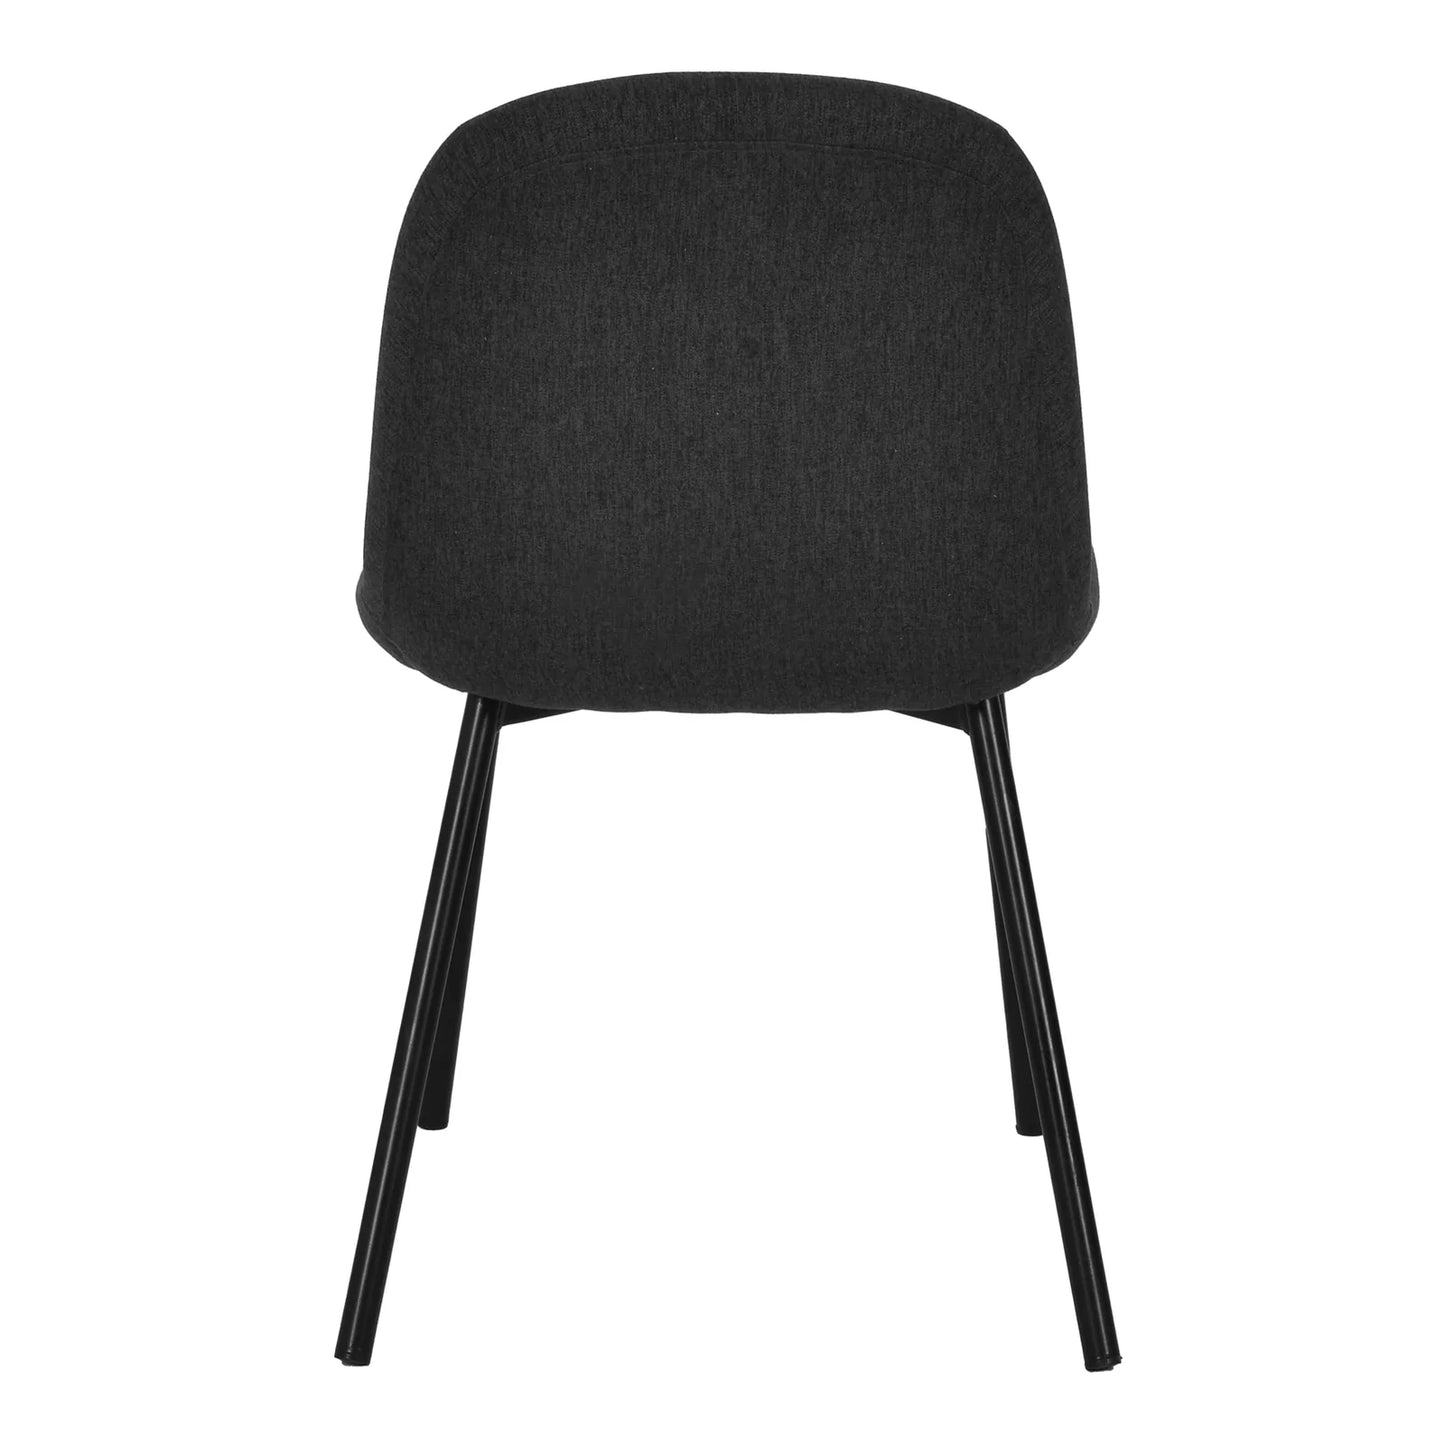 Midtown | Charcoal Grey Modern Metal Fabric Dining Chairs Set of 2 | Charcoal